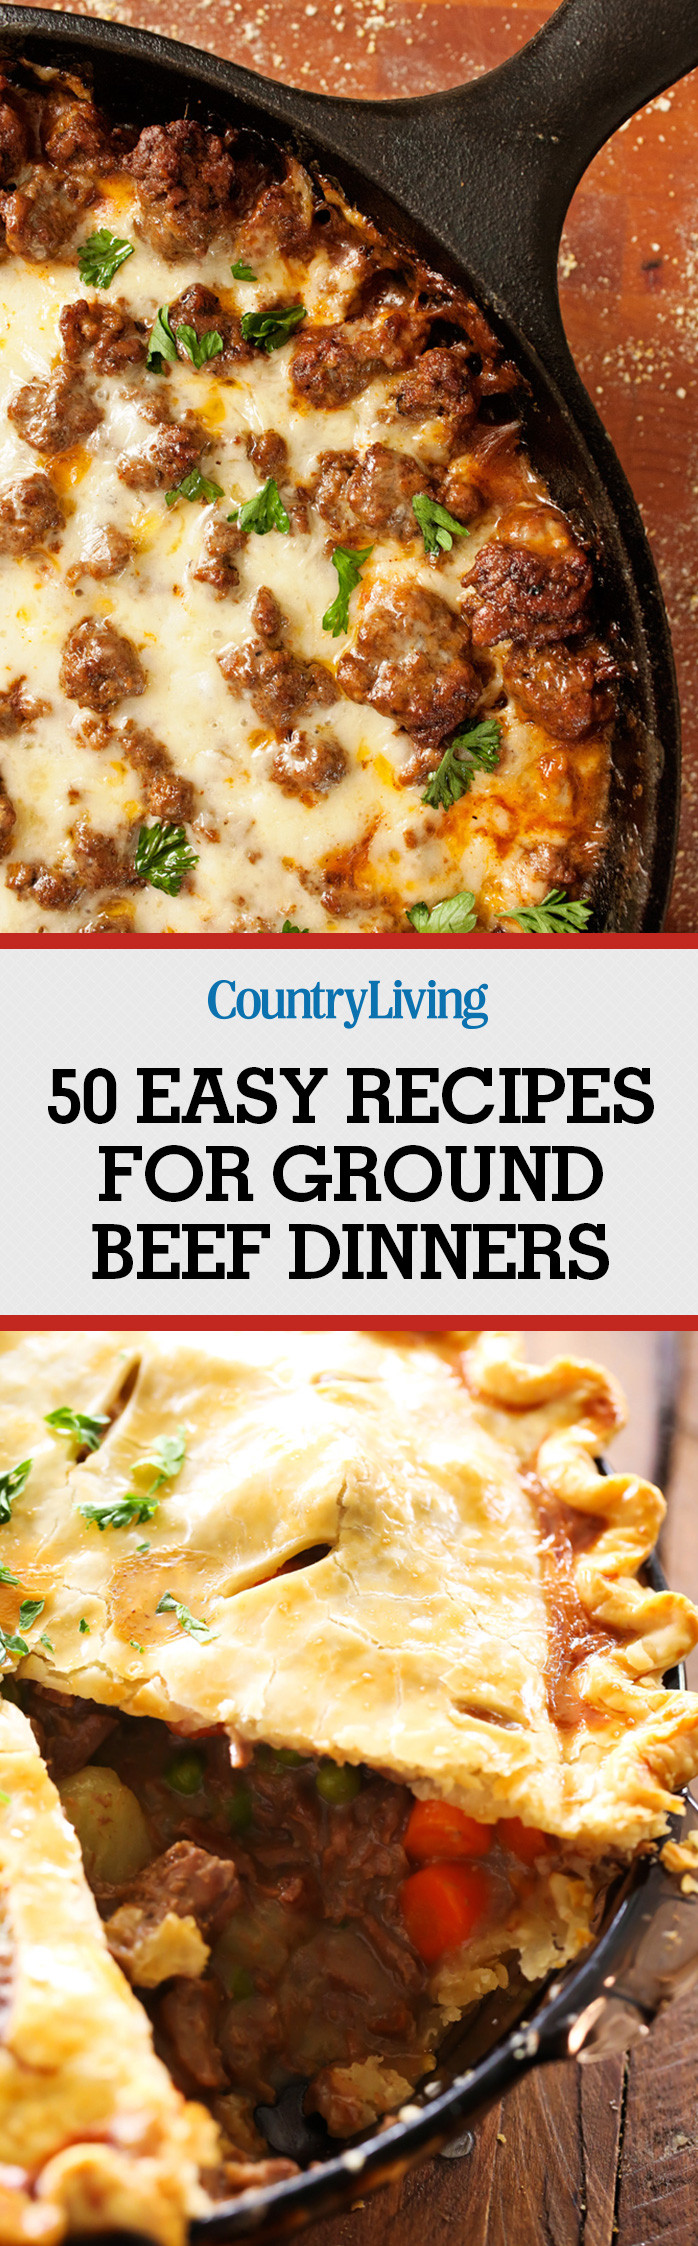 Simple Recipes With Ground Beef
 50 Best Ground Beef Recipes Dinner Ideas With Ground Beef